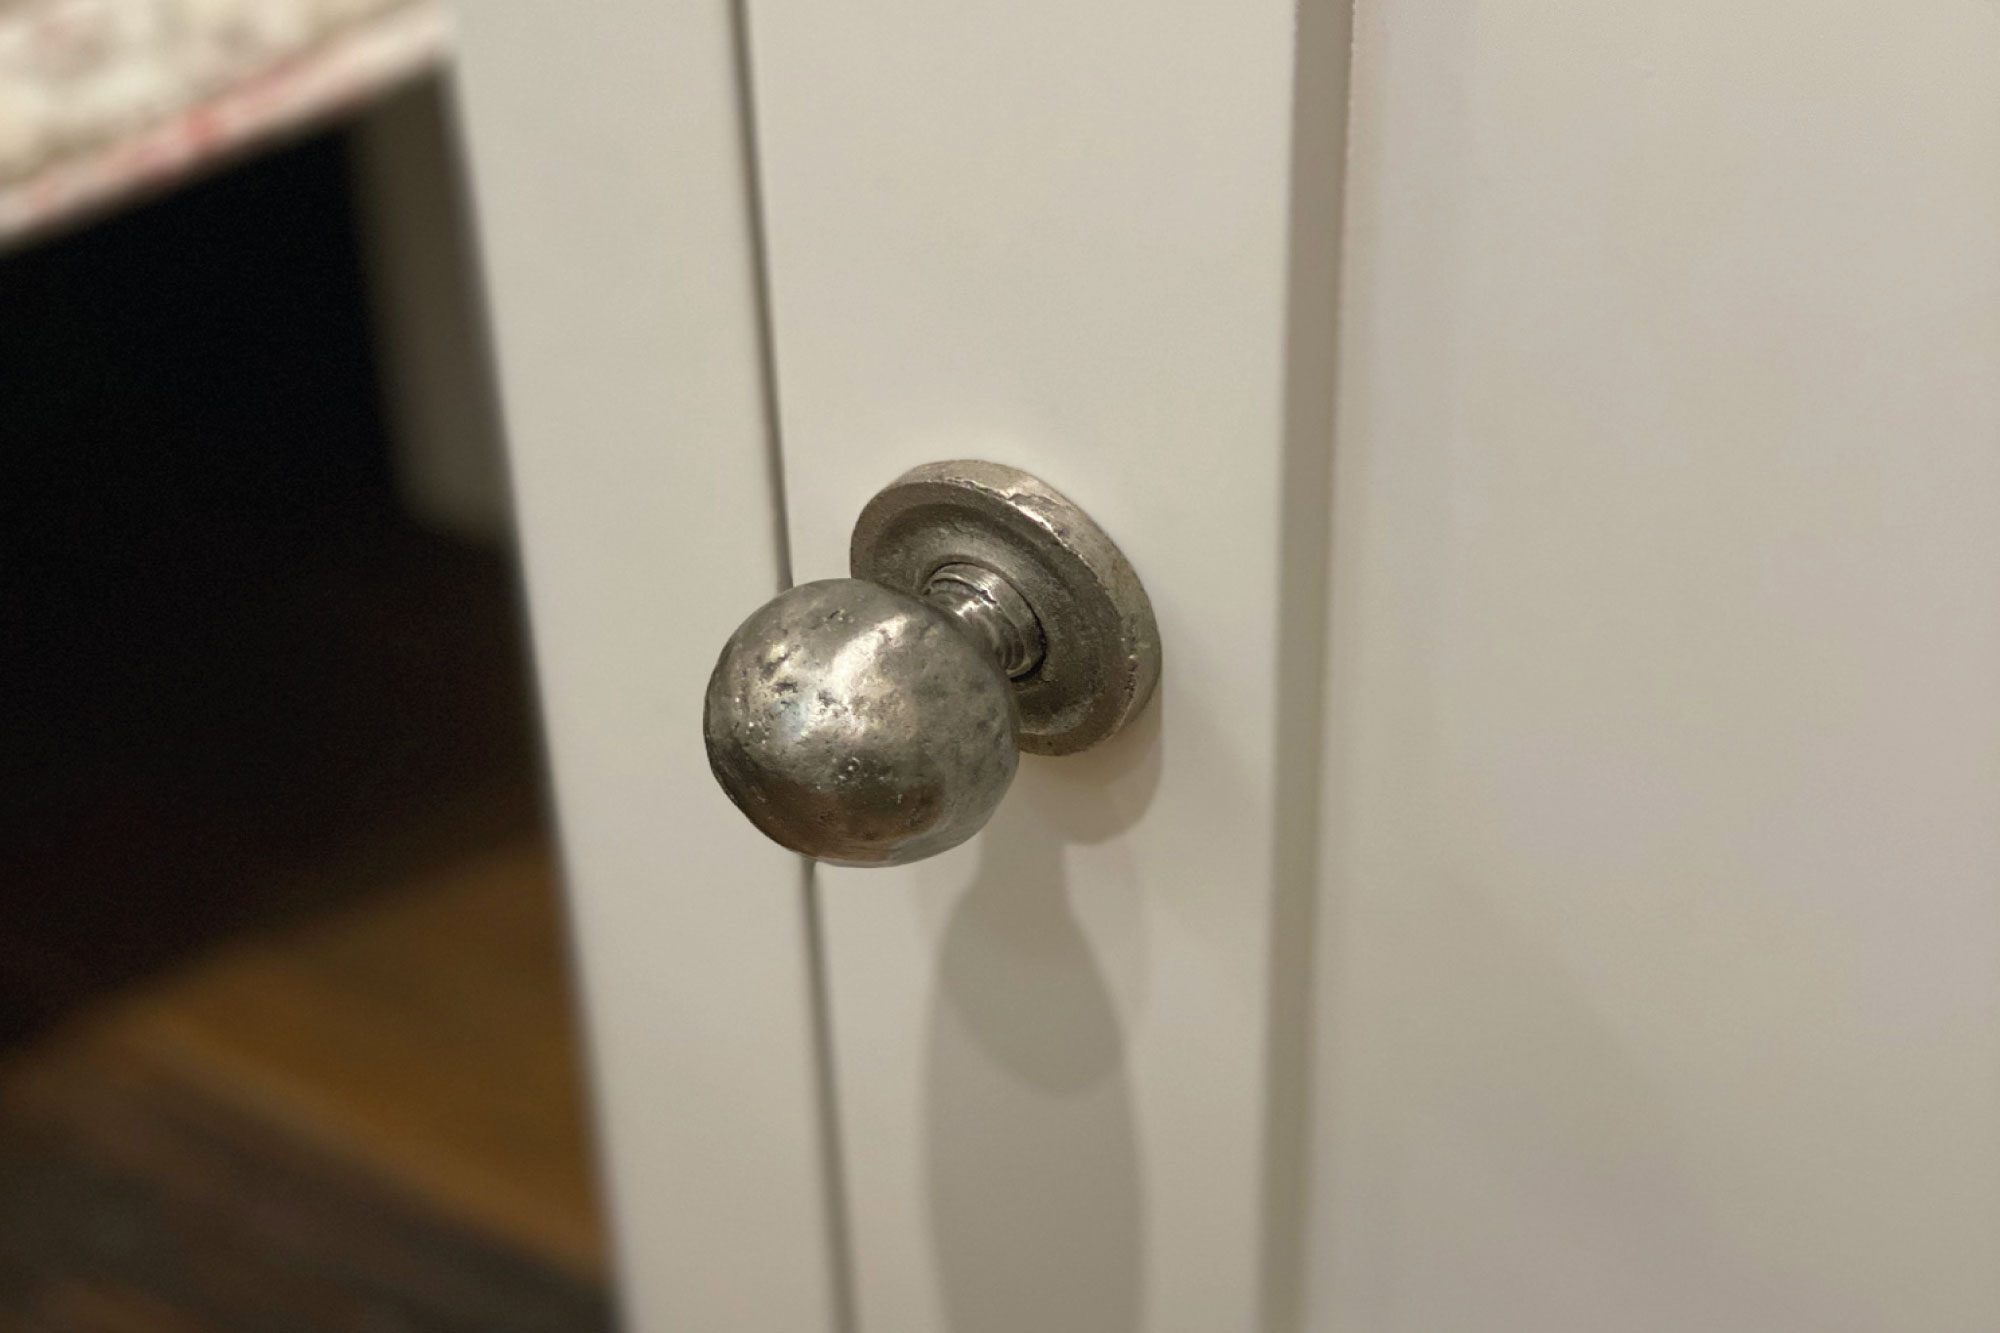 Hammered ball knob on bedside table